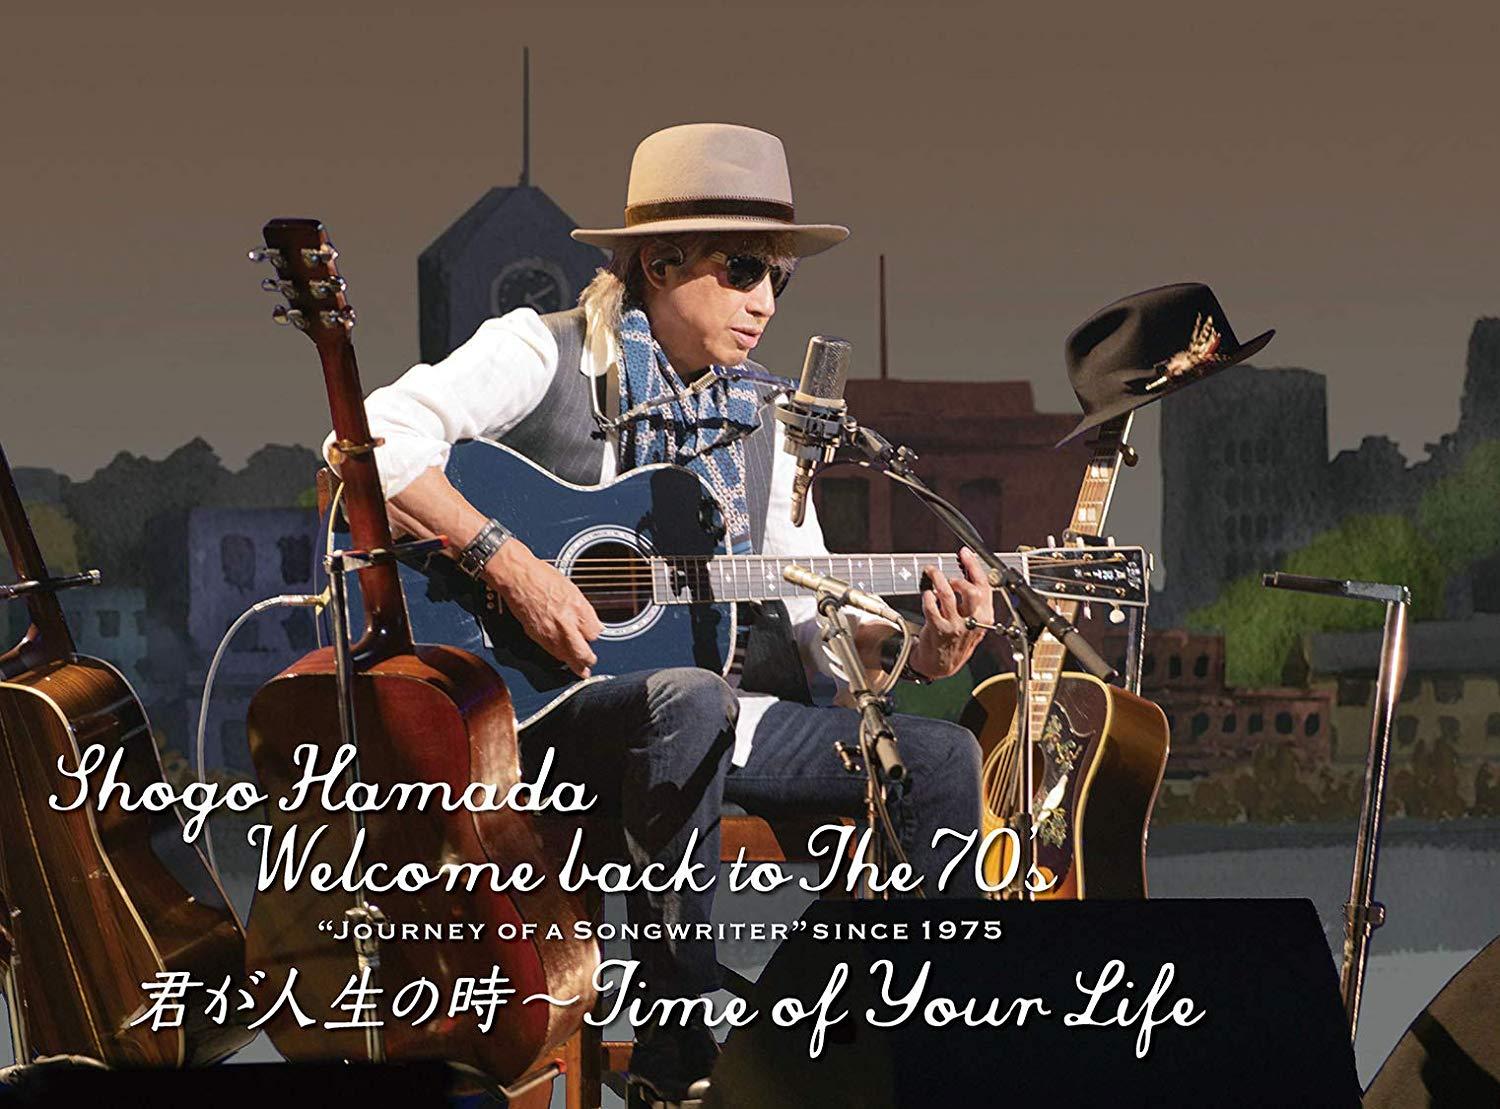 Welcome back to The 70 sgJourney of a Songwriter since 1975uNl̎`Time of Your Lifev(SY) lcȌ